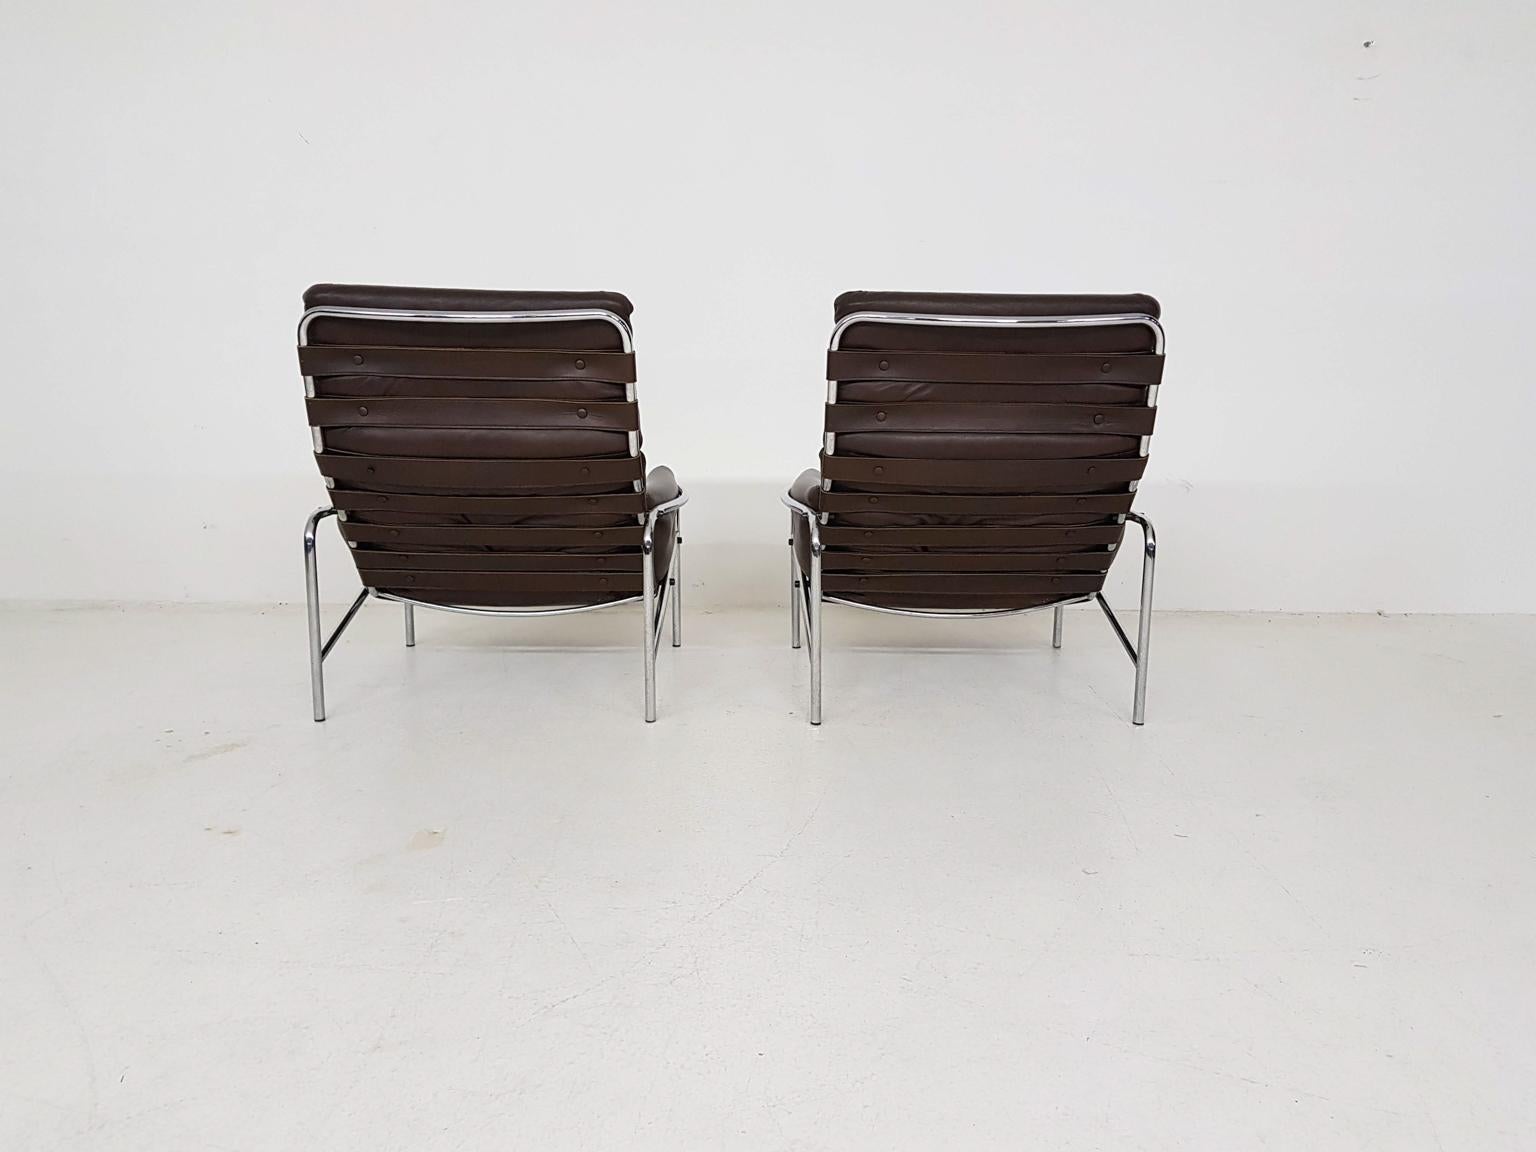 Mid-20th Century 1x Nagoya Brown Leather Lounge Chair by Martin Visser for ’t Spectrum, Dutch '69